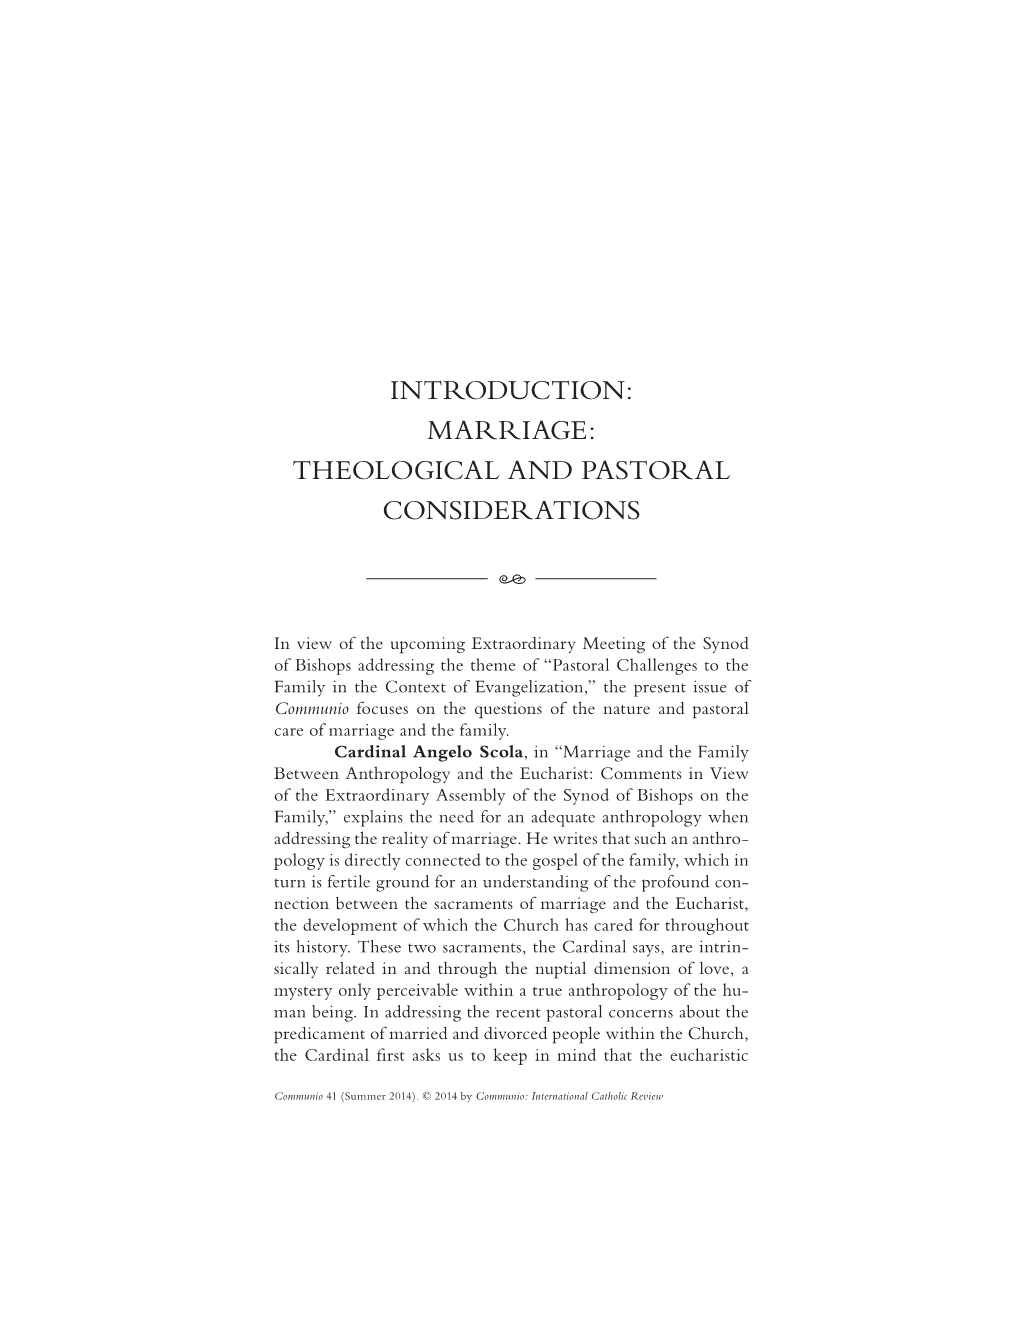 Introduction: Marriage: Theological and Pastoral Considerations